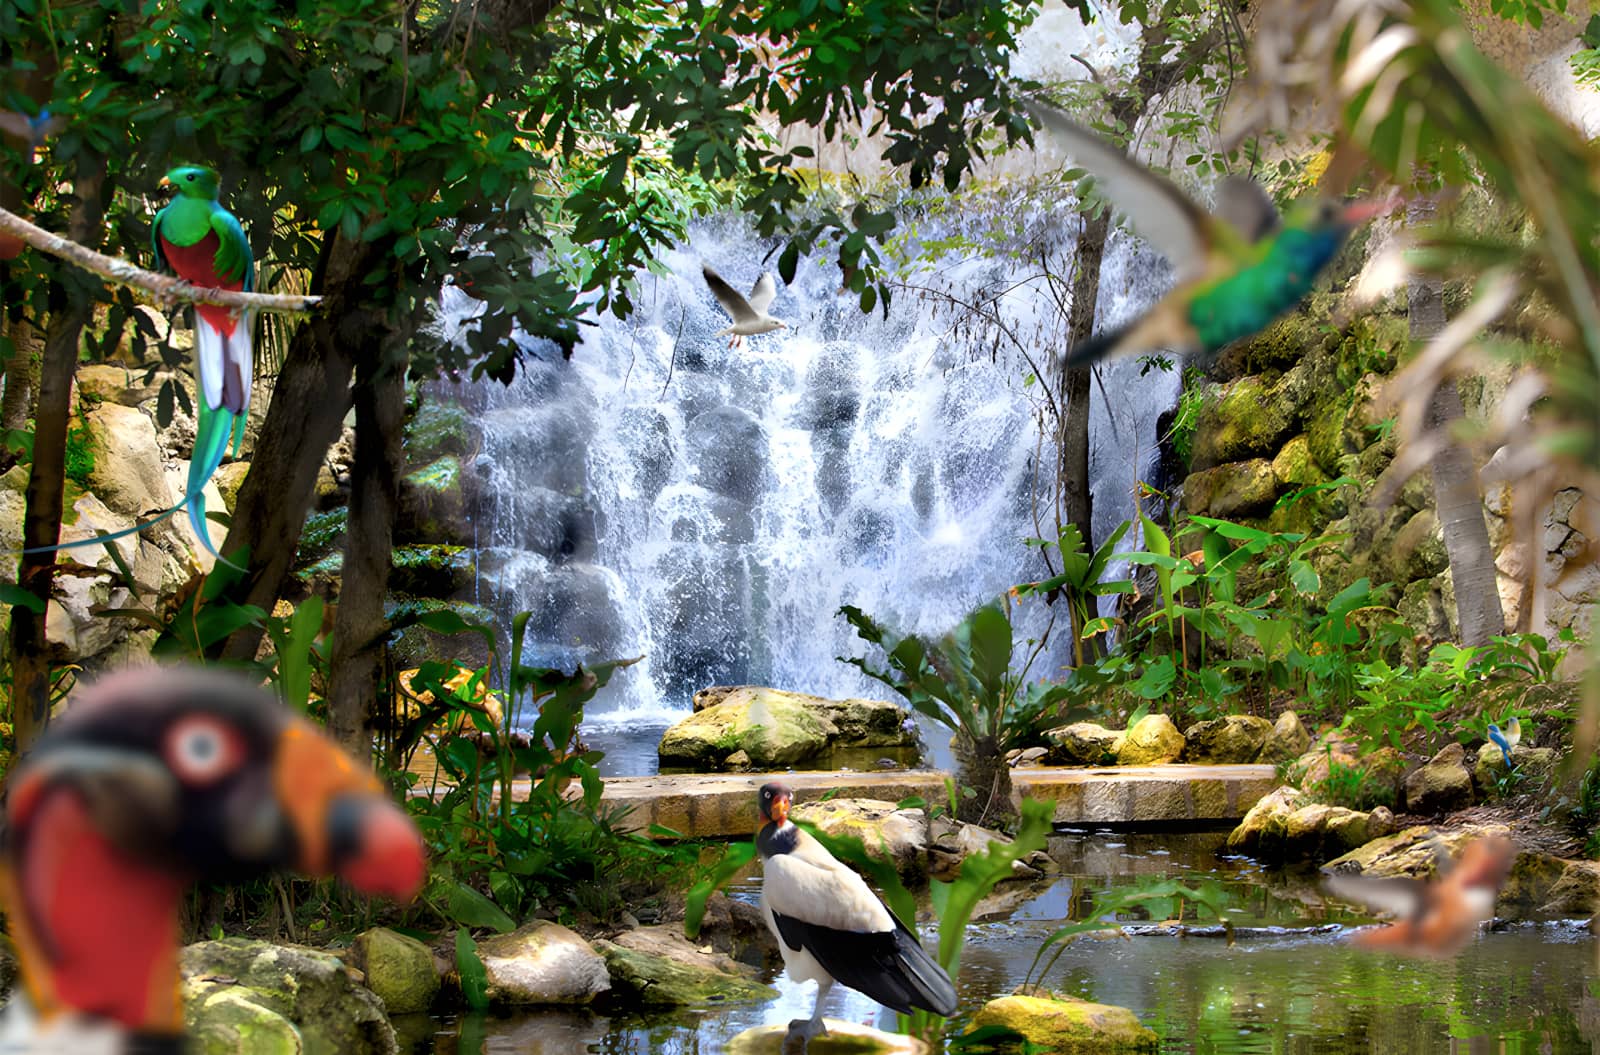 Xcaret Aviary. A waterfall in the background with different species of birds.